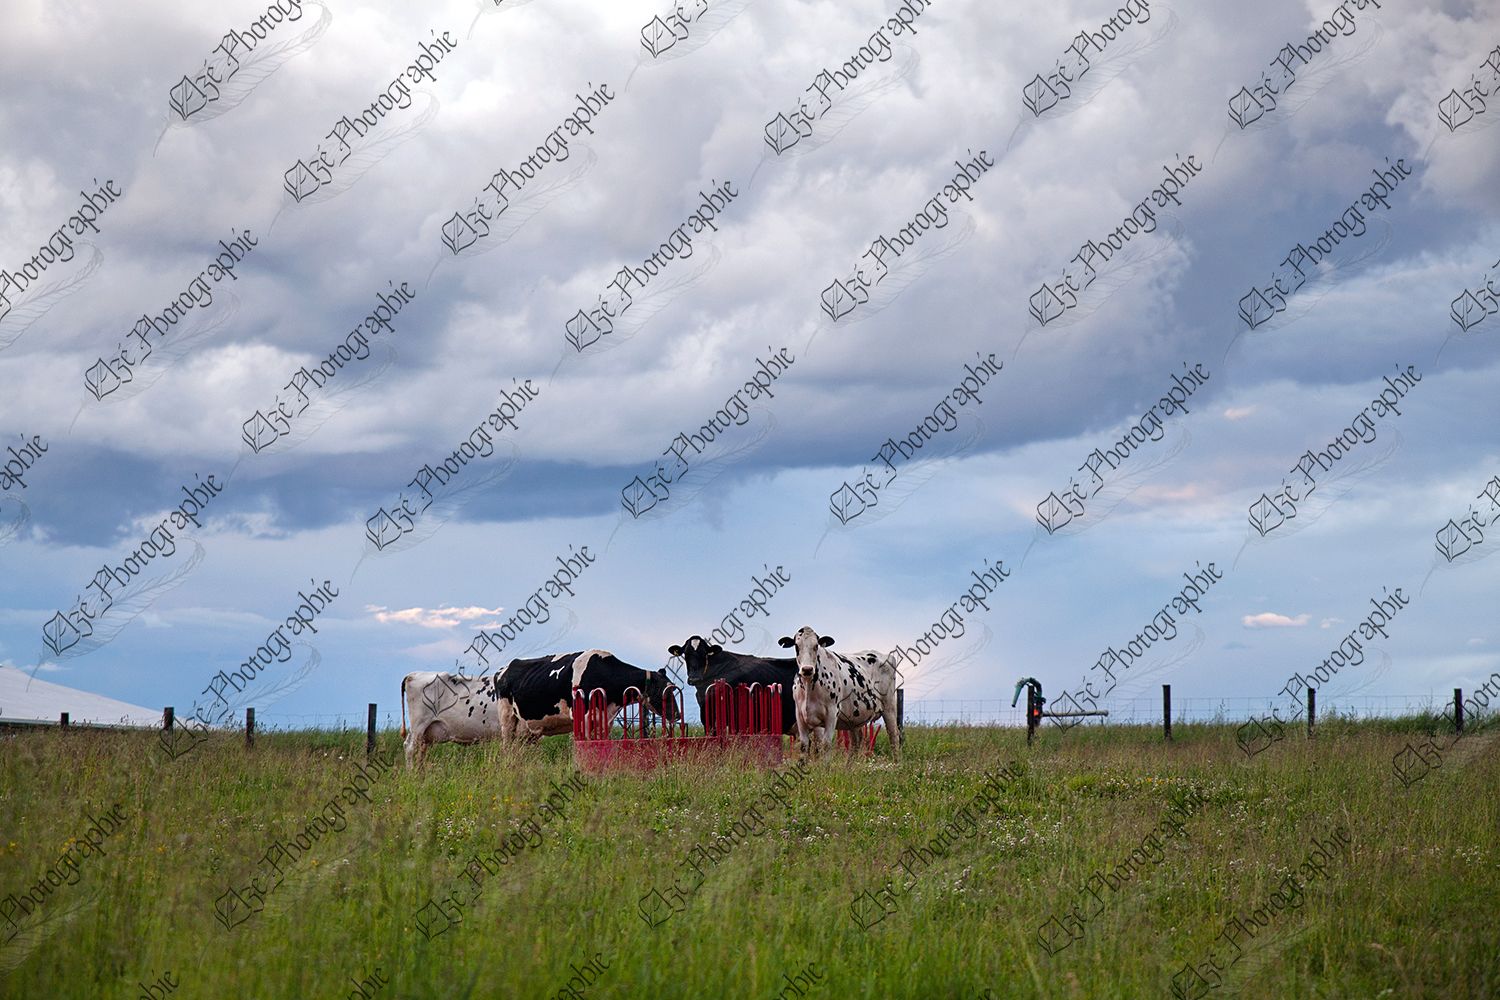 elze_photo_2340_nuages_camapagne_vaches_annual_grazing_agricultural